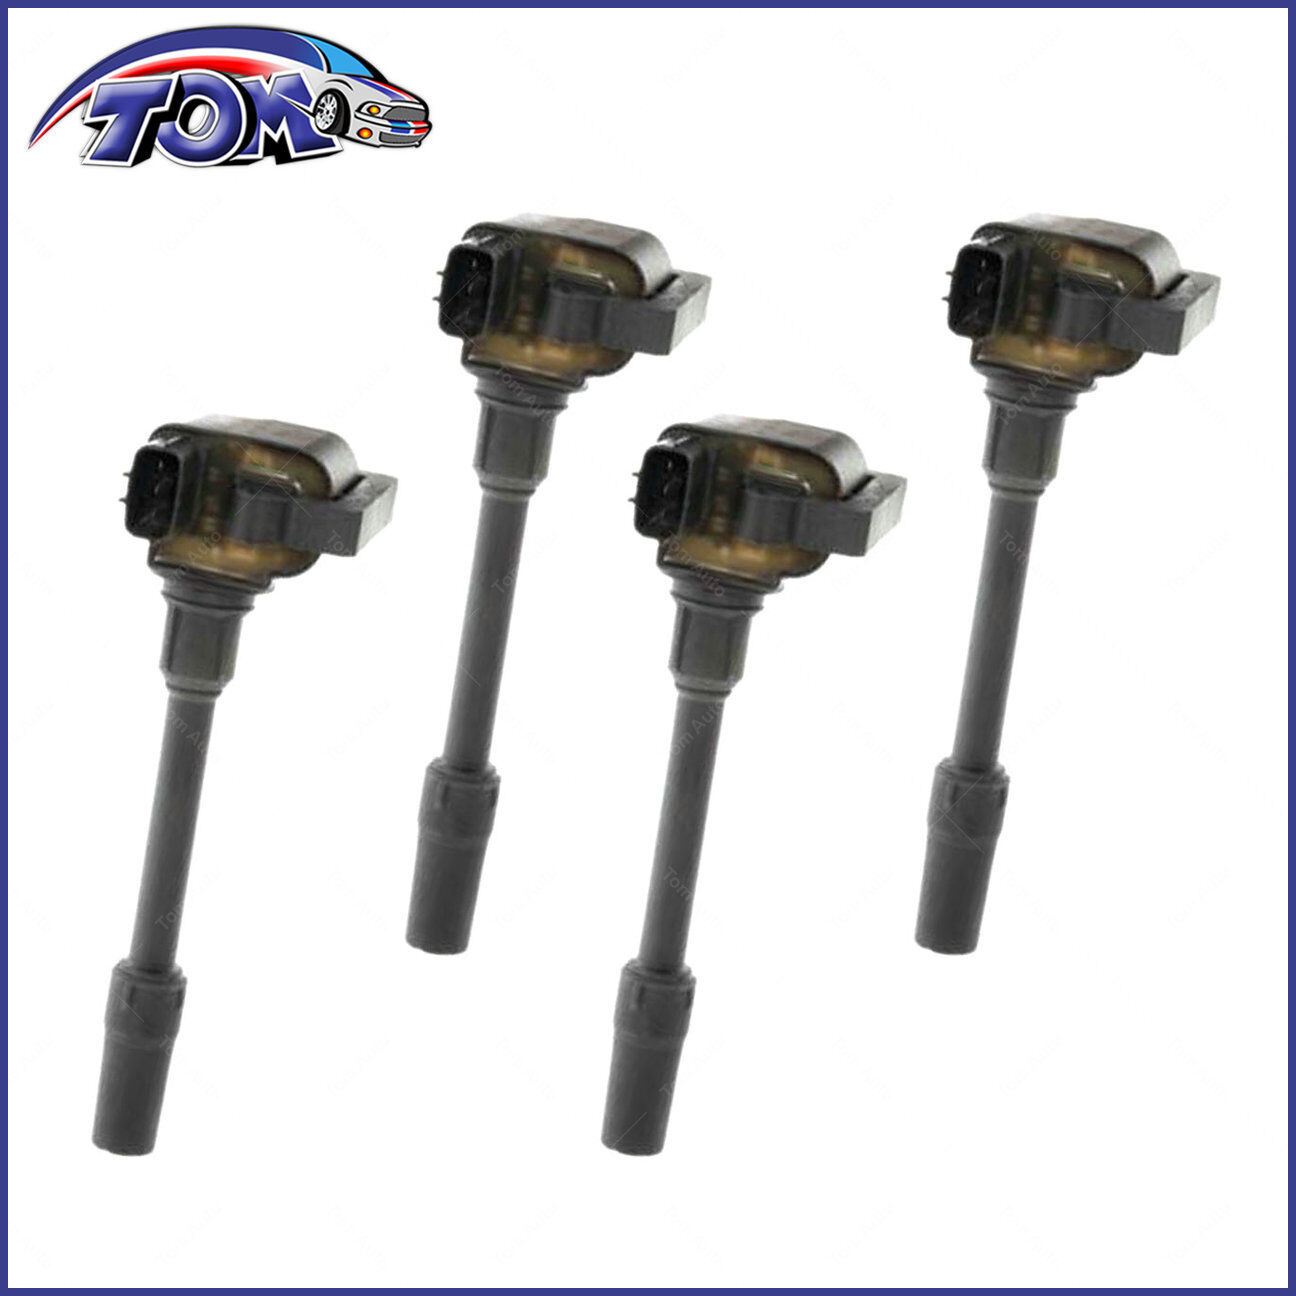 New Set Of 4 Ignition Coils For Mitsubishi Carisma Space Star 4G93 4G94 MD362913